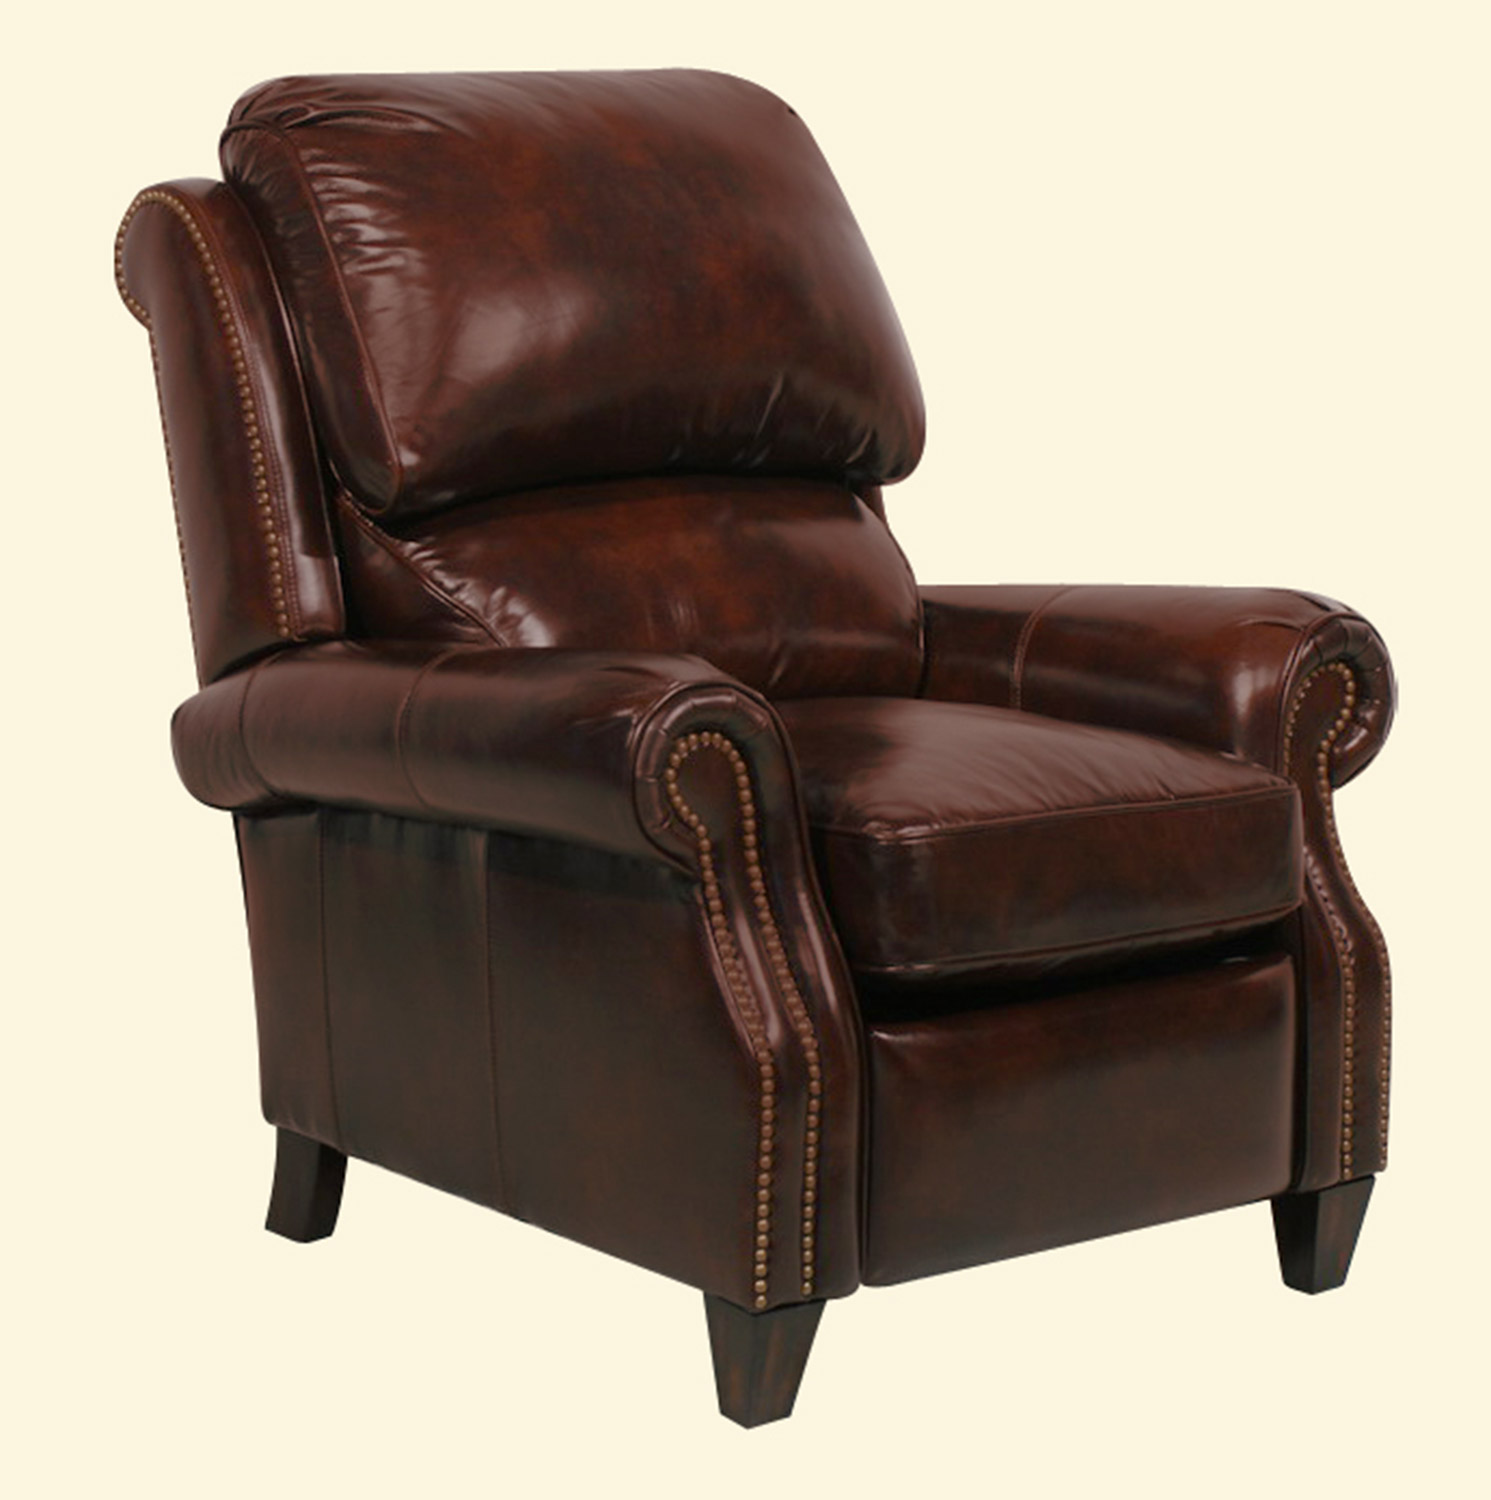 Barcalounger Churchill ll Vintage Reserve Leather Recliner - Fudge